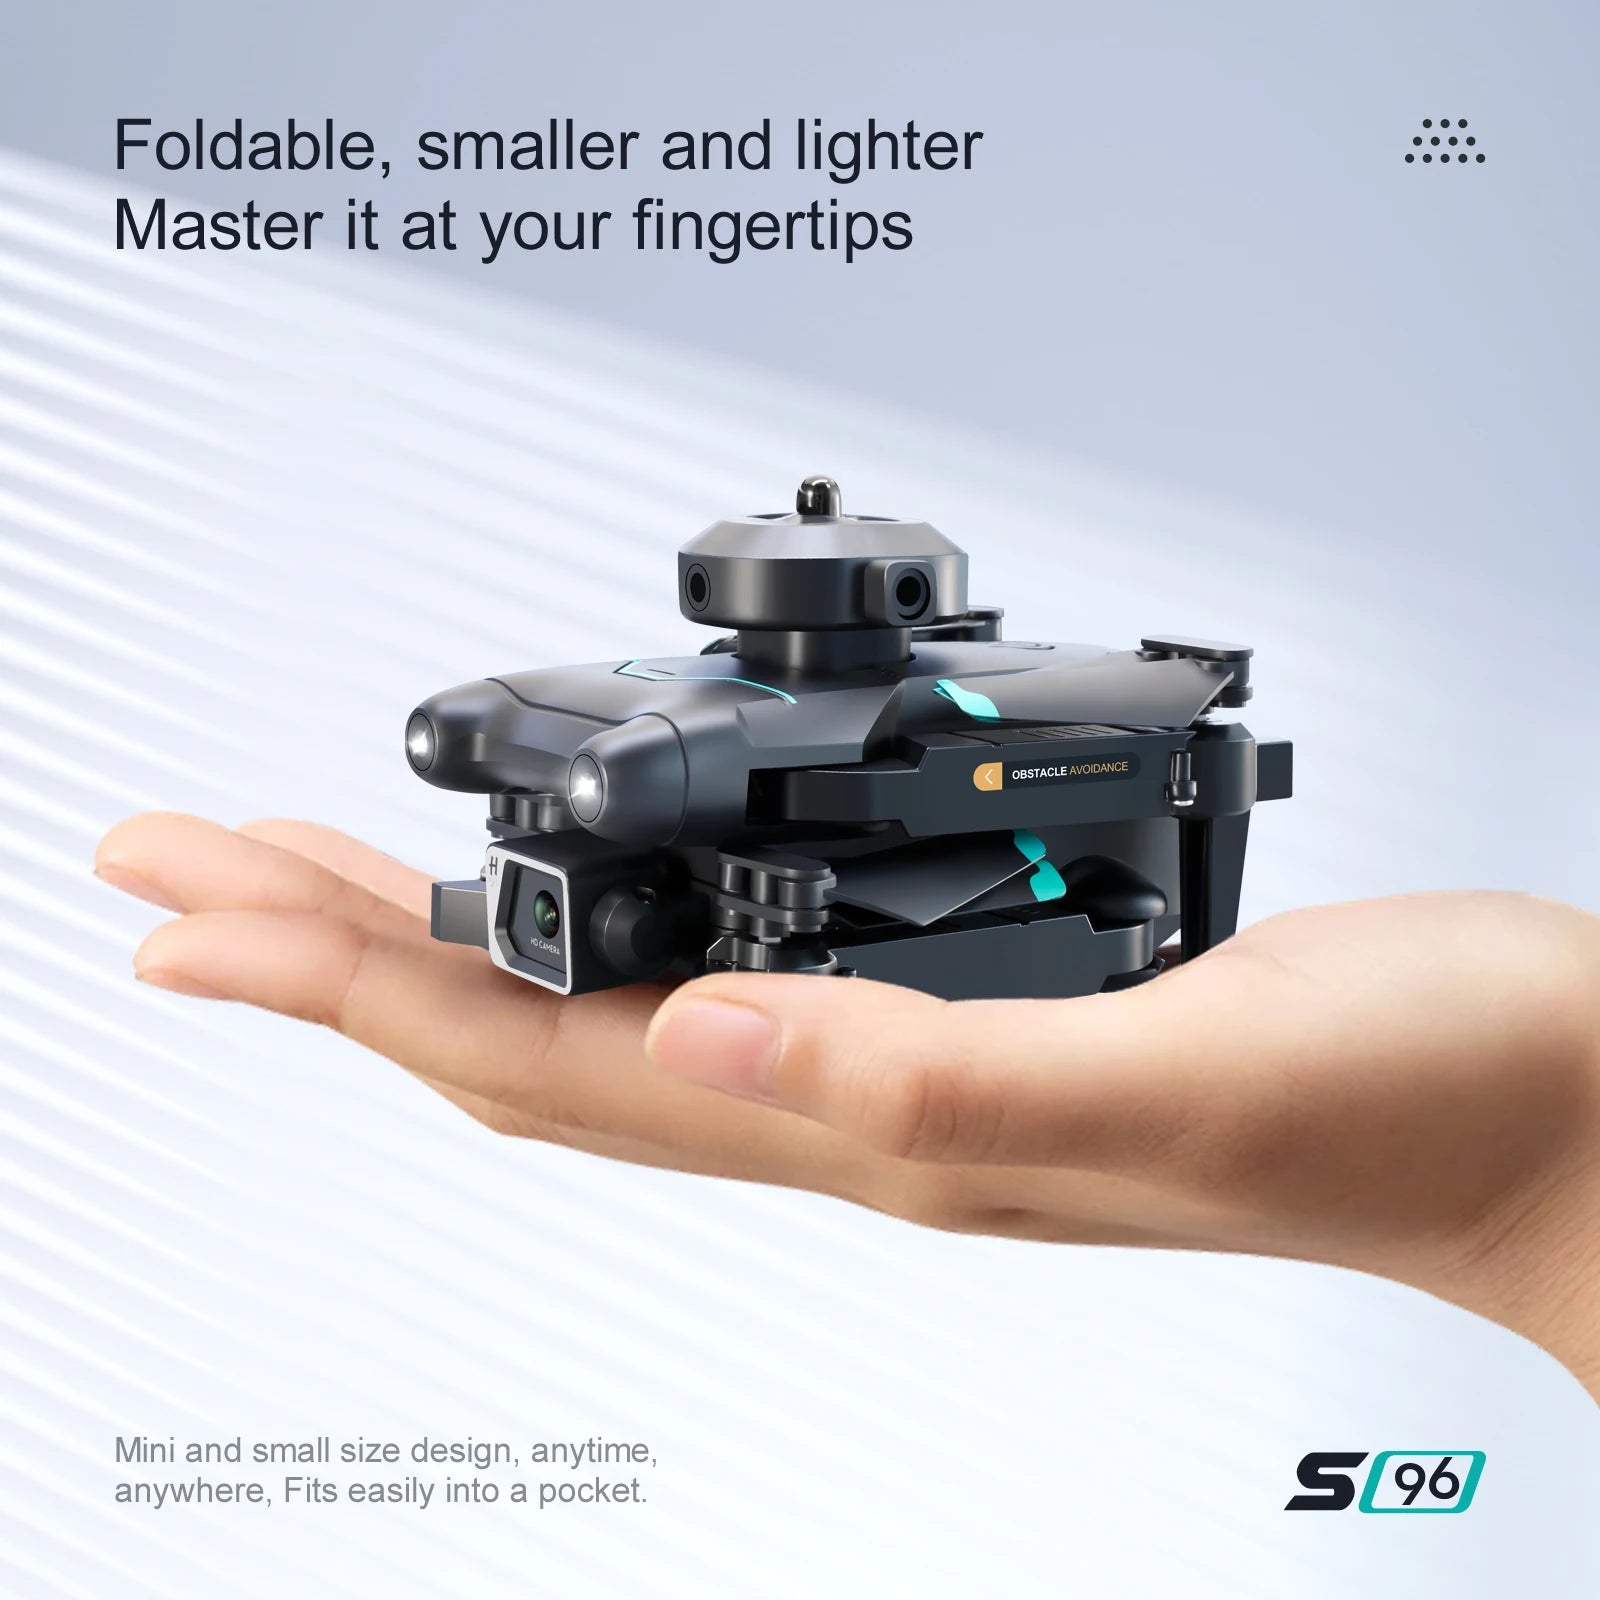 foldable, smaller and lighter master it at your fingertips obstacle avoidance